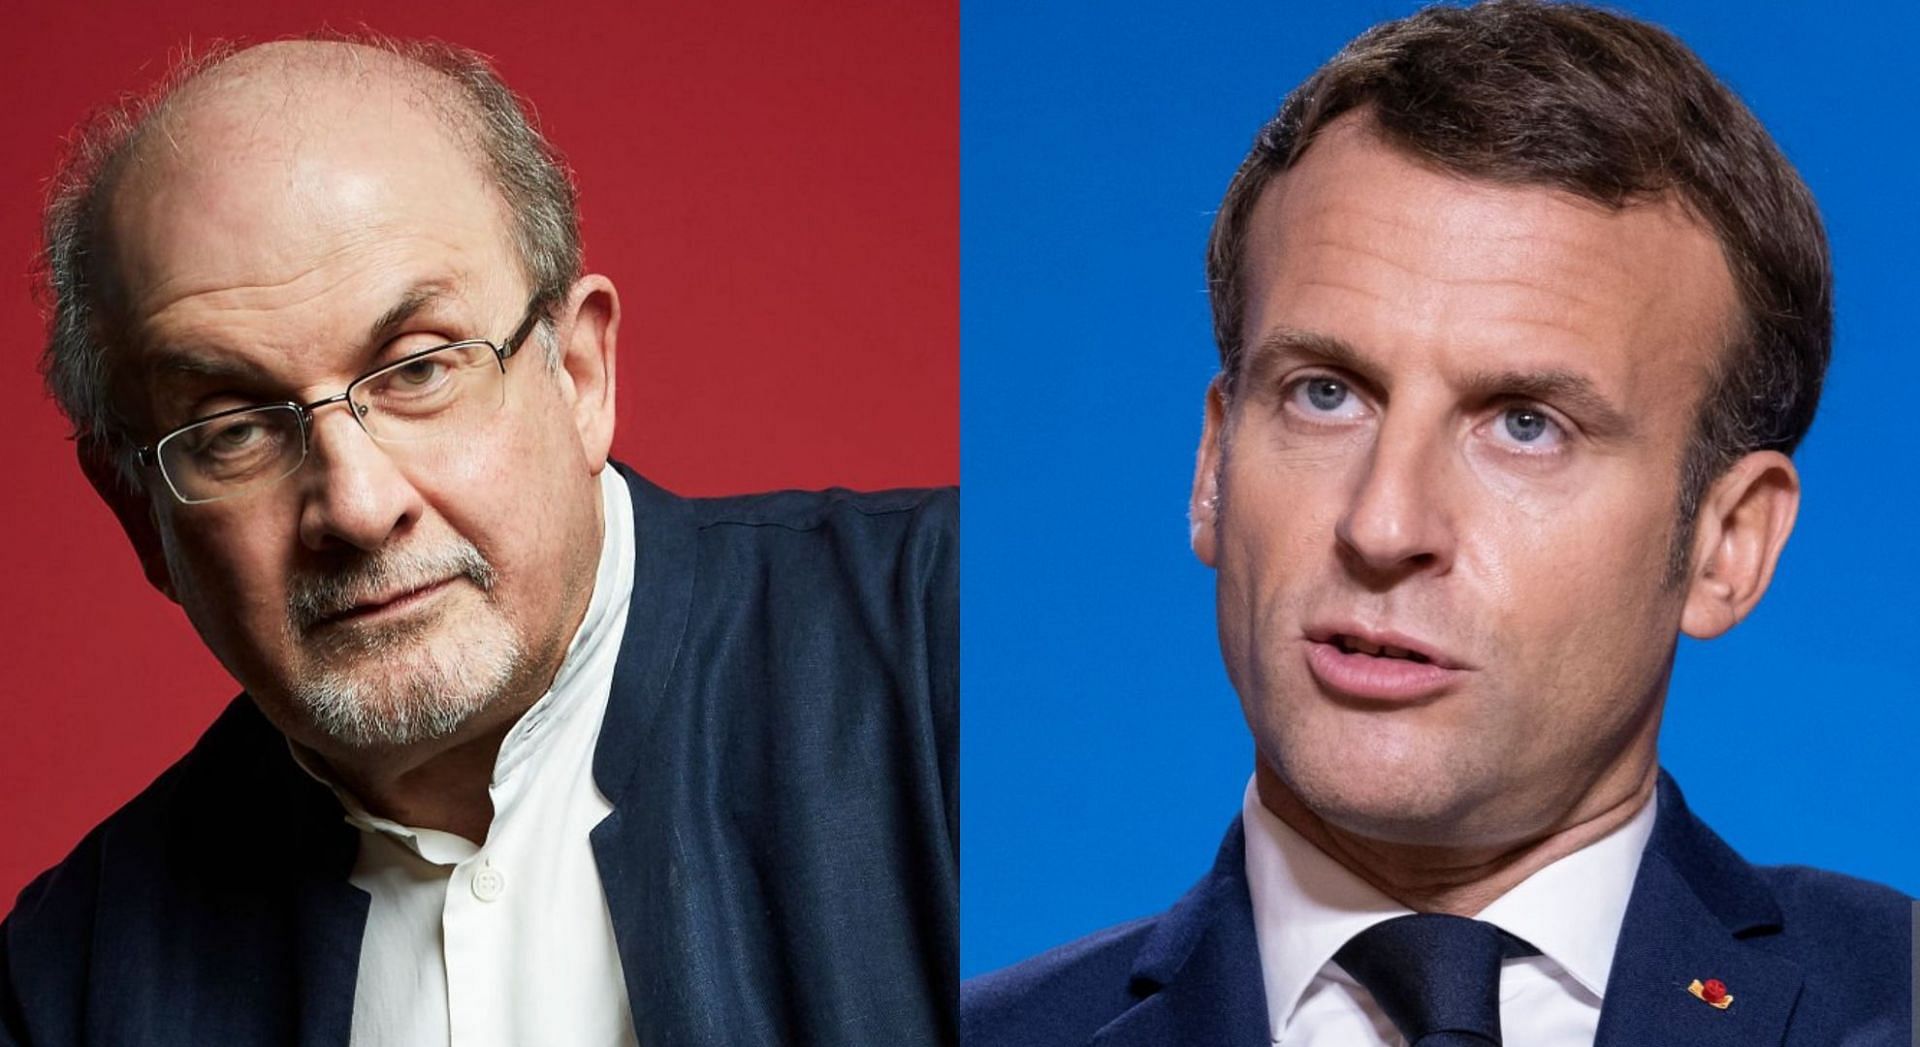 France President Emmanuel Macron condemned the attack against Salman Rushdie (Image via Getty Images)